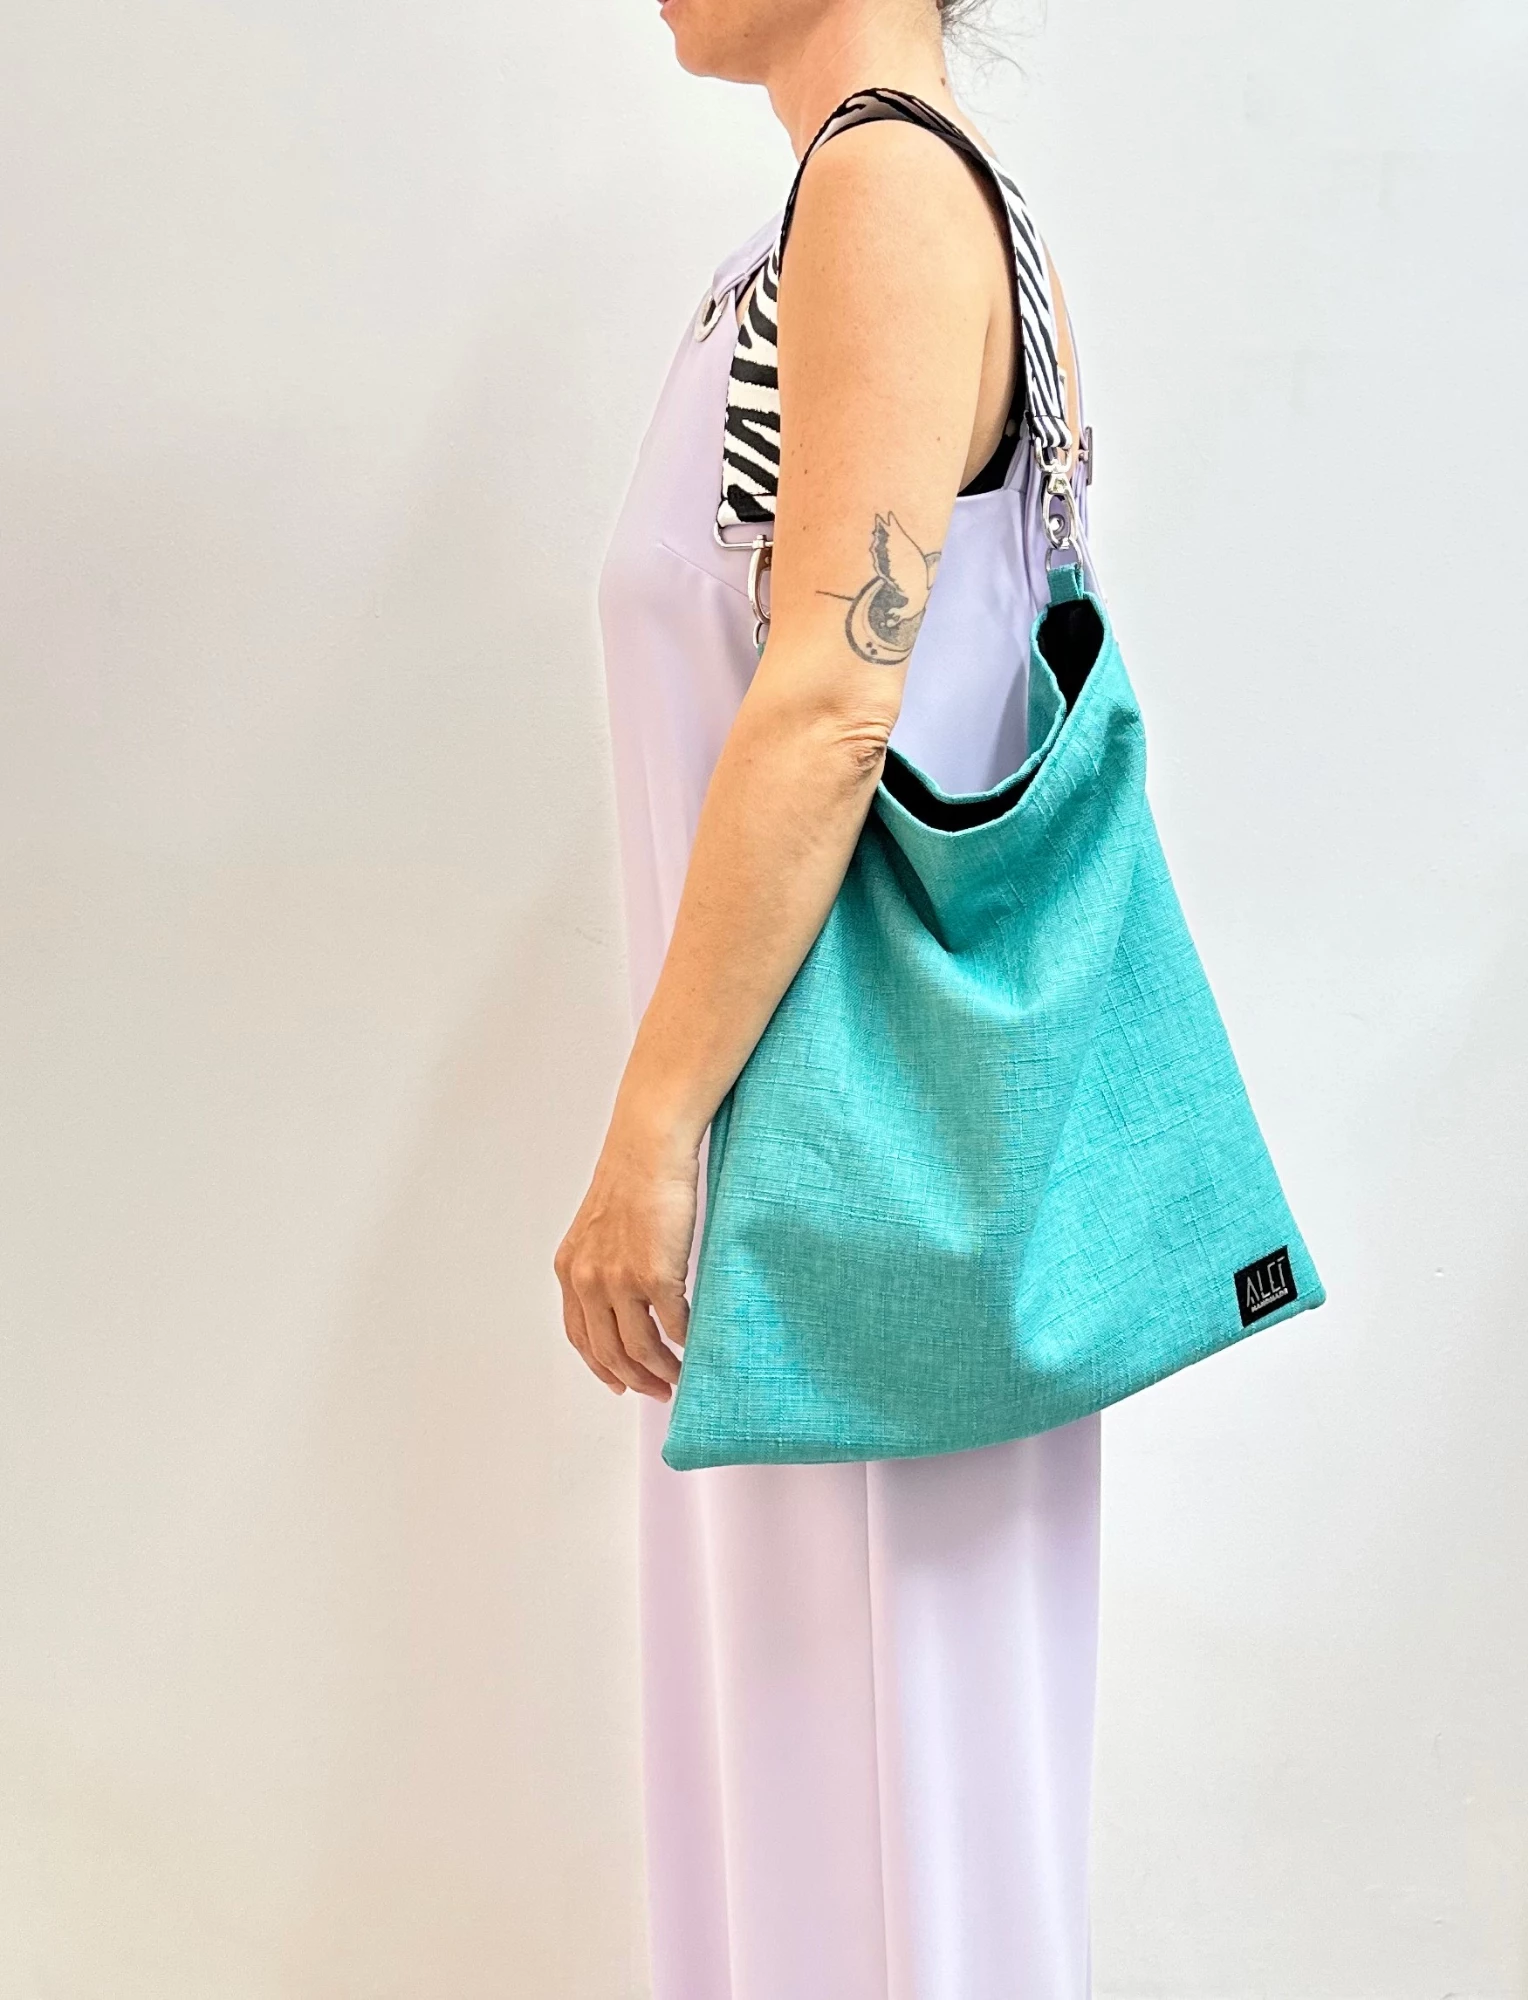 ✨NEW COLOR✨ The city shoulder bag in Turquoise!